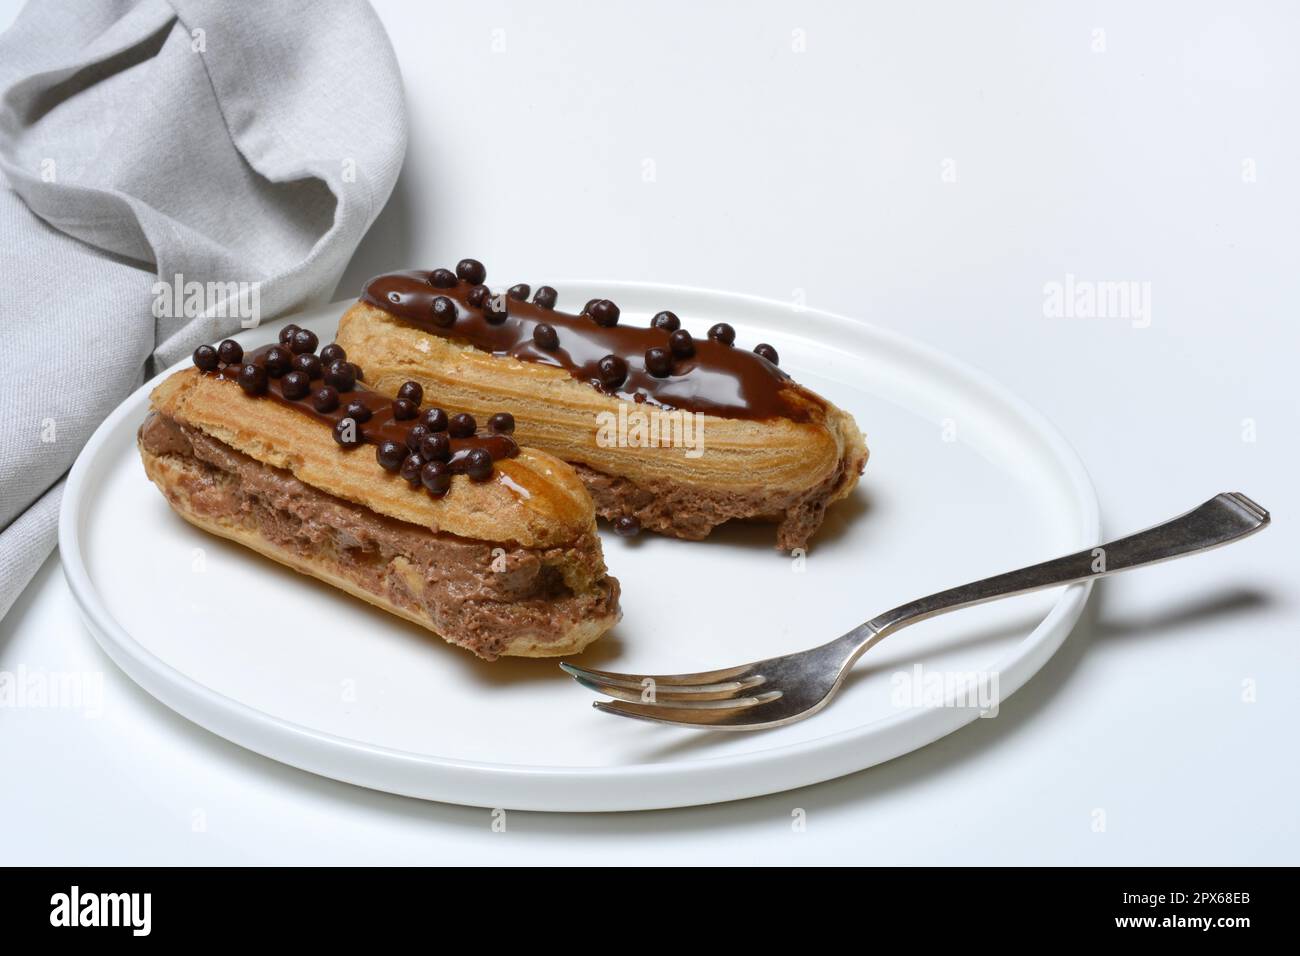 Two chocolate eclairs on a plate, eclair Stock Photo